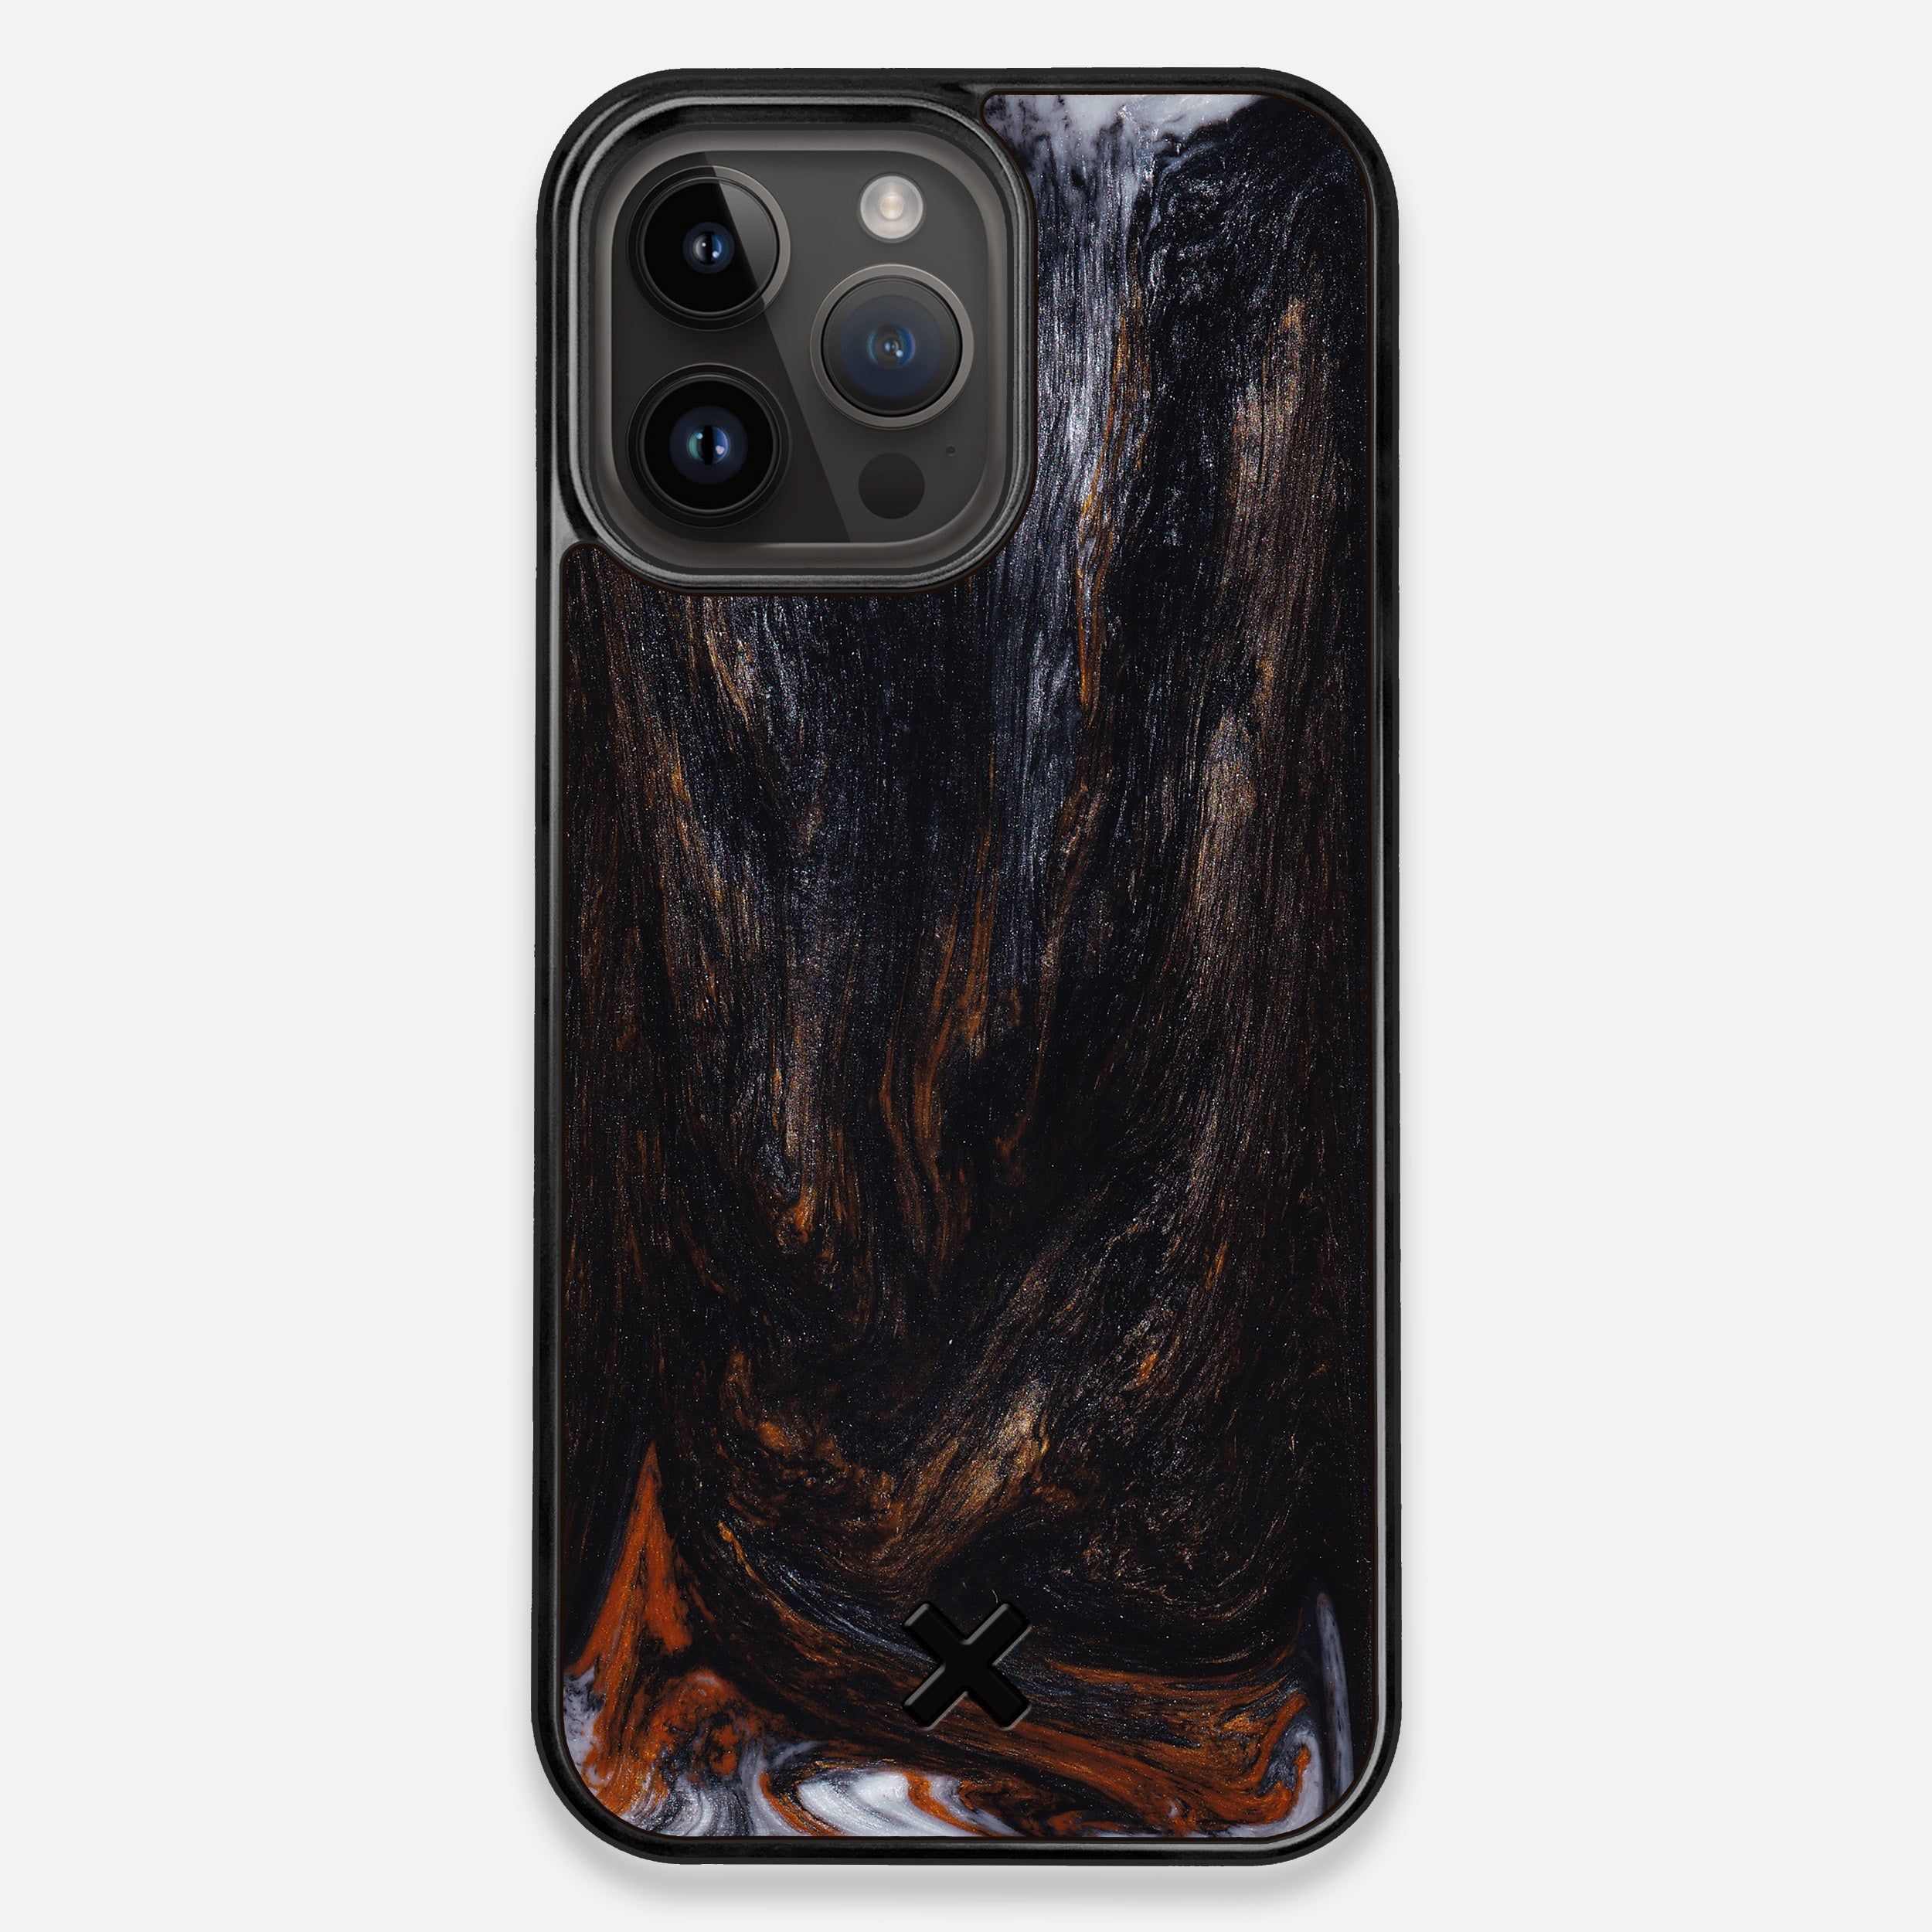 One & Only - Wood and Resin Case - #01743